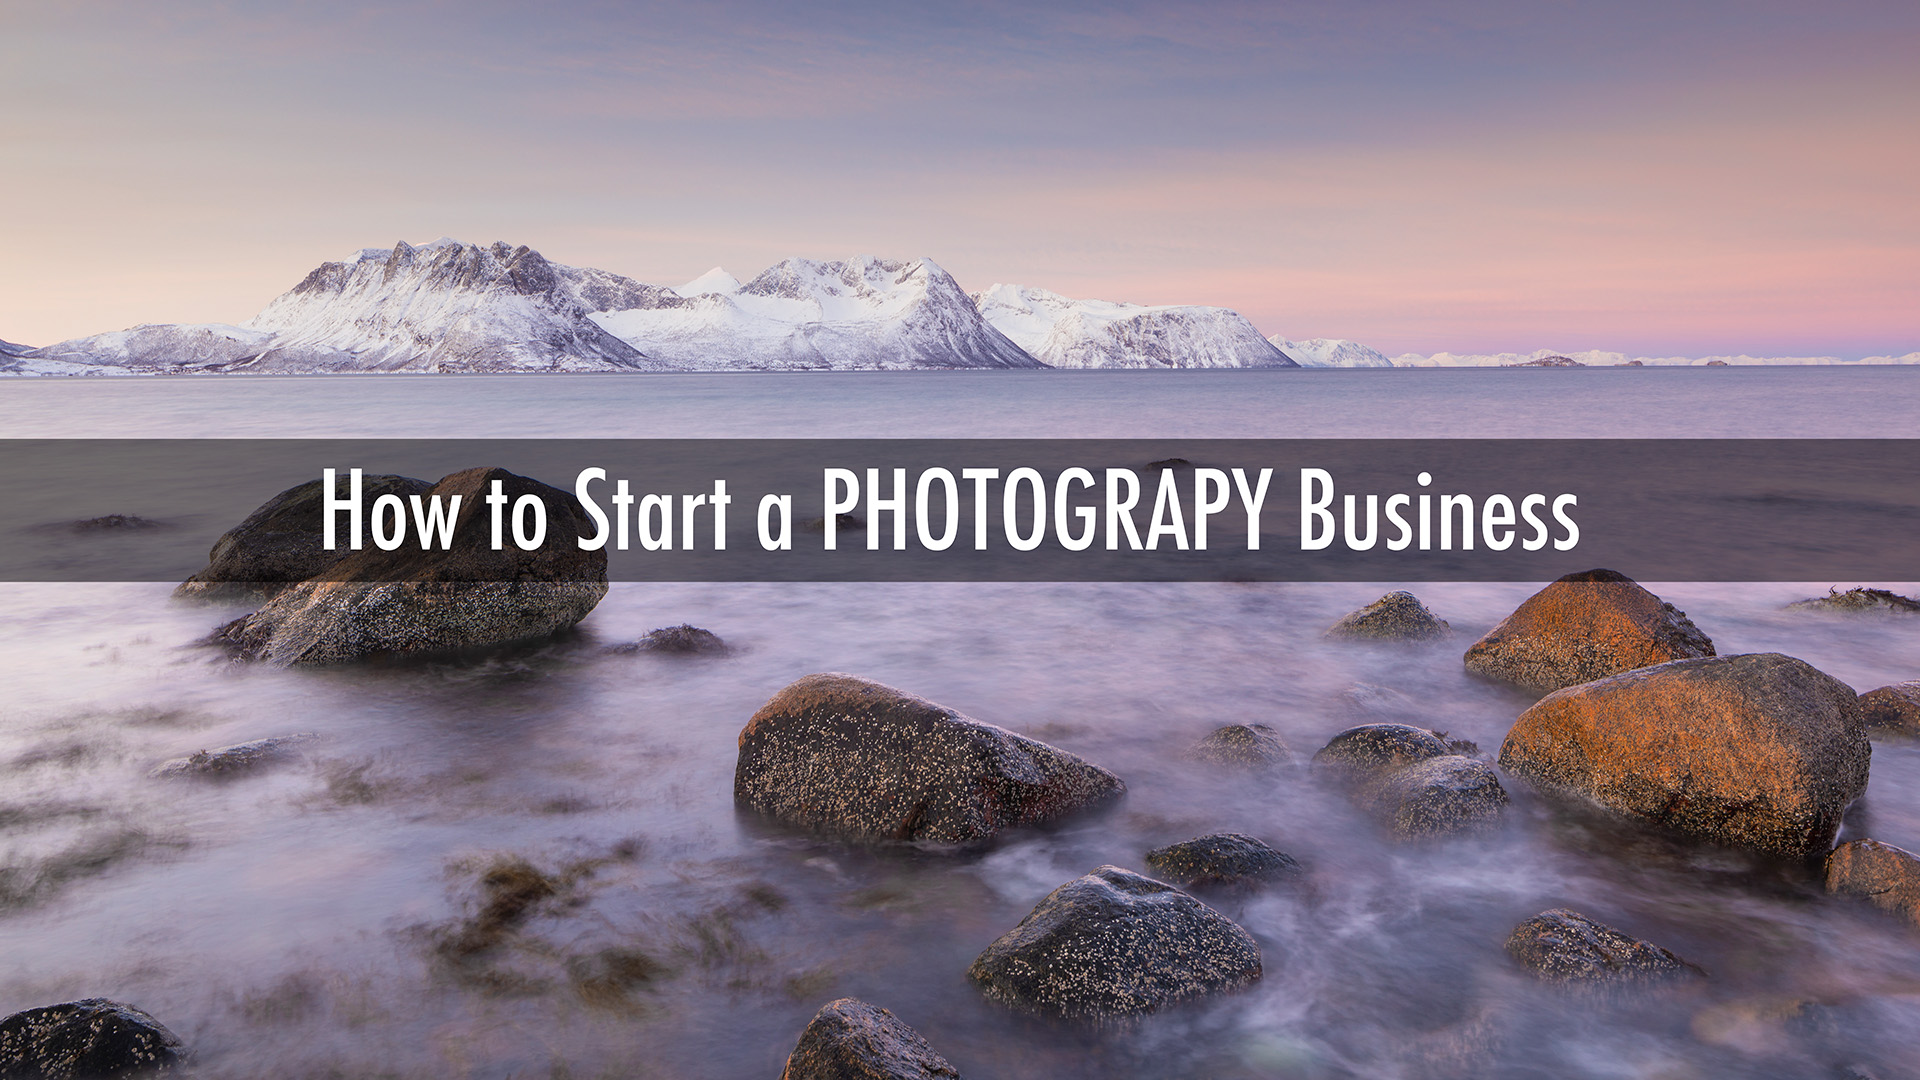 How to start a photography business. 7 tips to get you up and running.